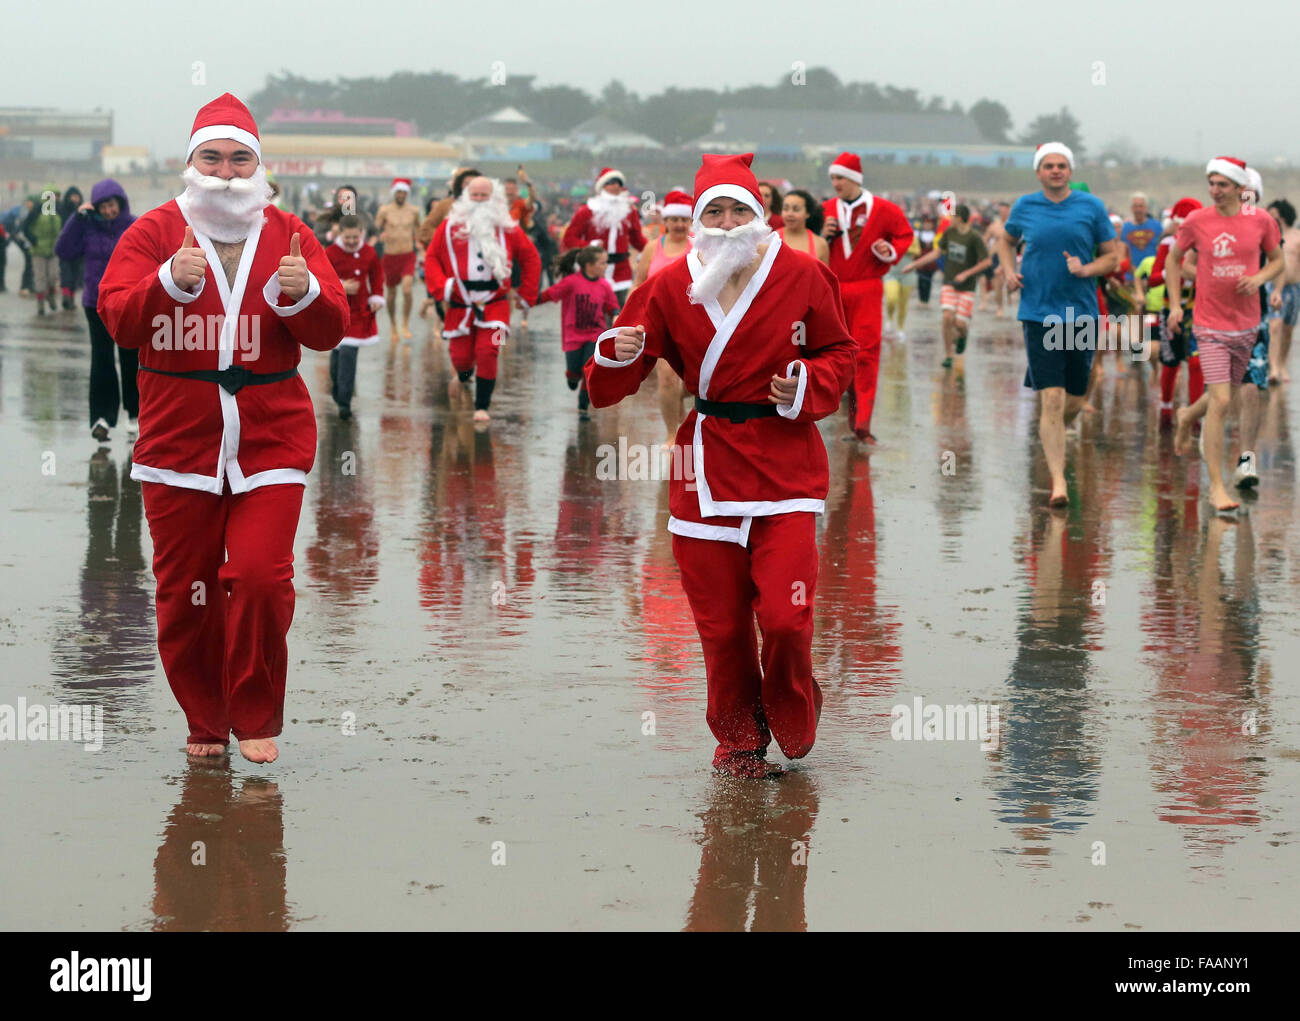 Porthcawl, UK. Friday 25 December 2015 Two Christmas swimmers in Santa costumes run towards  the seaRe: Hundreds of people in fancy dress, have taken part in this year's Christmas Swim in Porthcawl, south Wales. Credit:  D Legakis/Alamy Live News Stock Photo